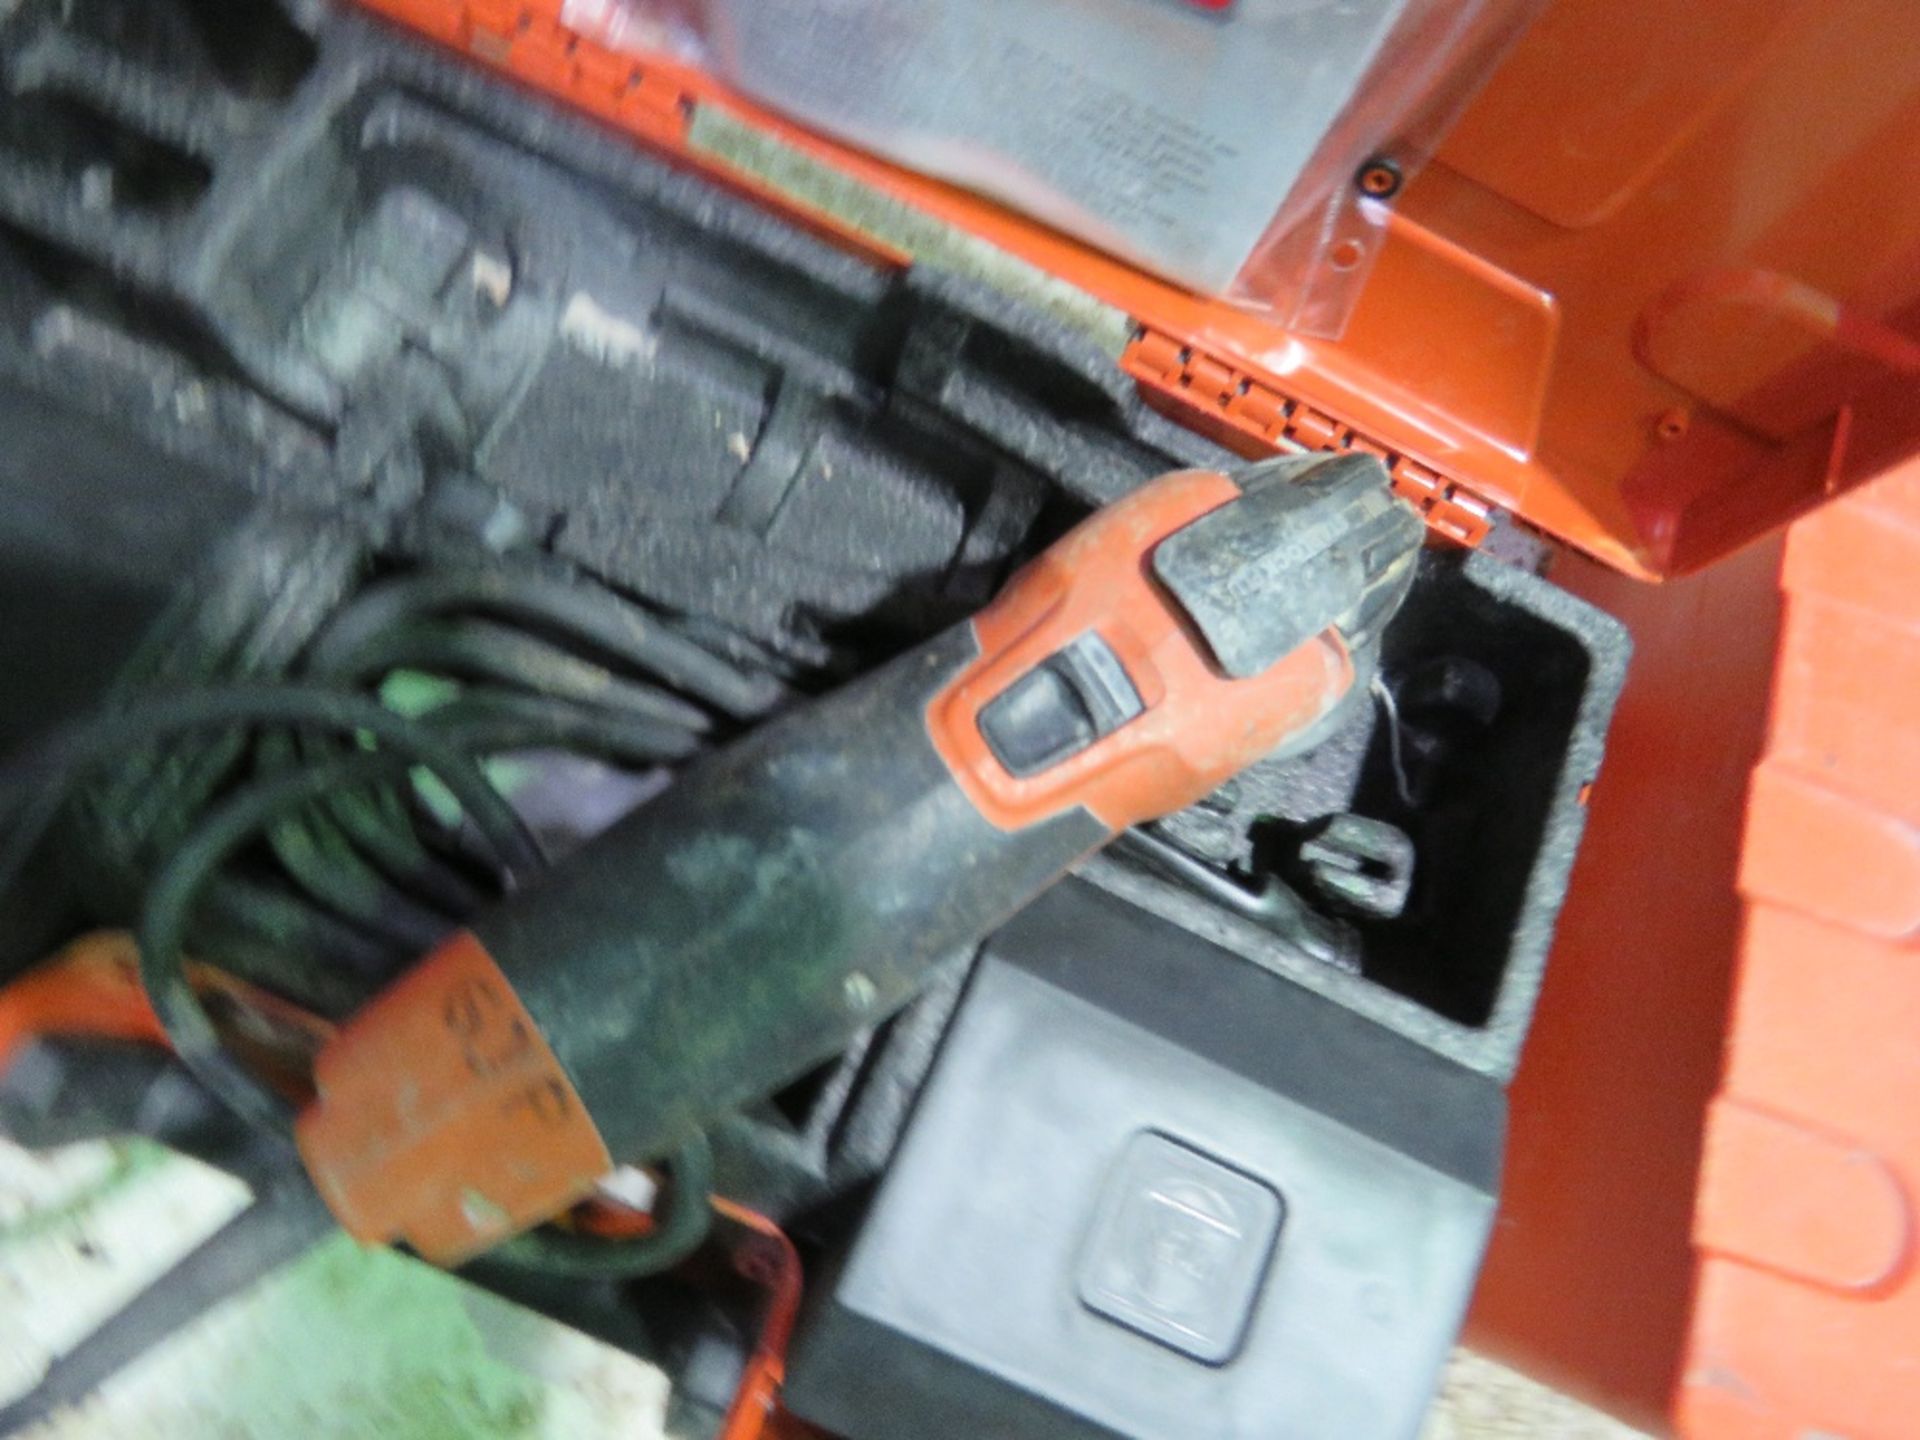 FEIN 110VOLT MULTI TOOL IN A BOX. DIRECT FROM LOCAL COMPANY. - Image 3 of 4